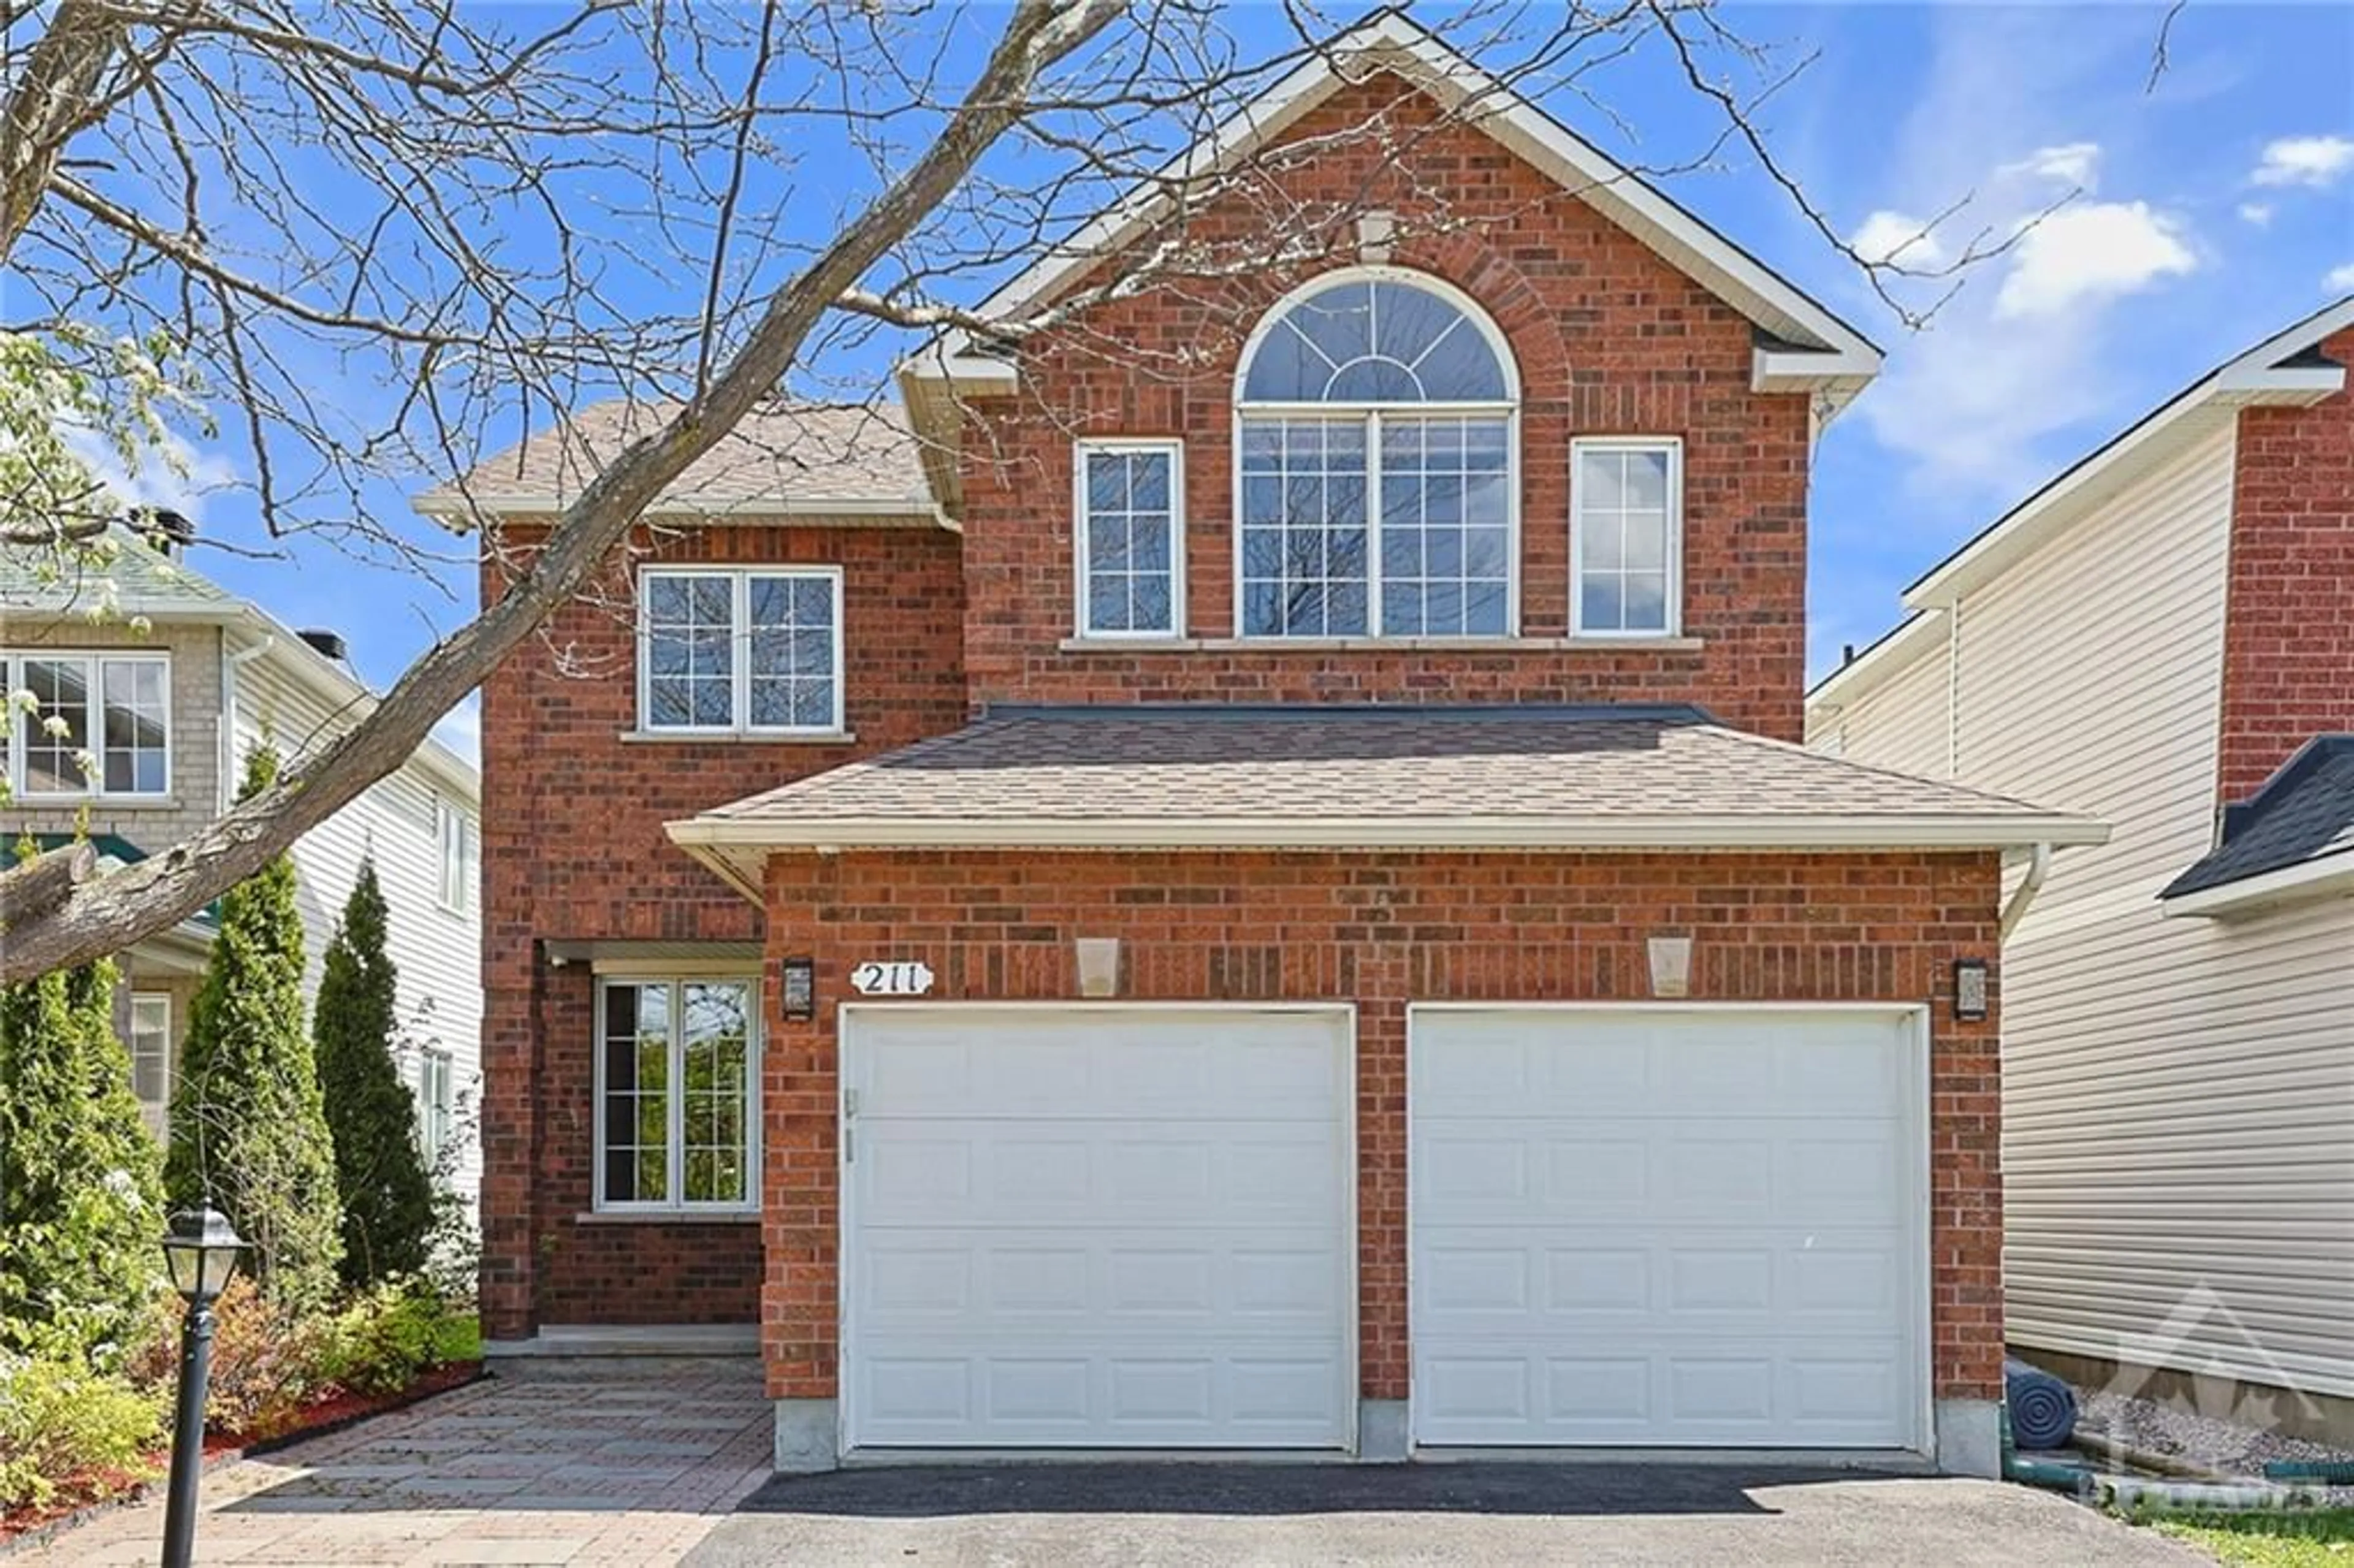 Home with brick exterior material for 211 STONEWAY Dr, Ottawa Ontario K2G 6R2